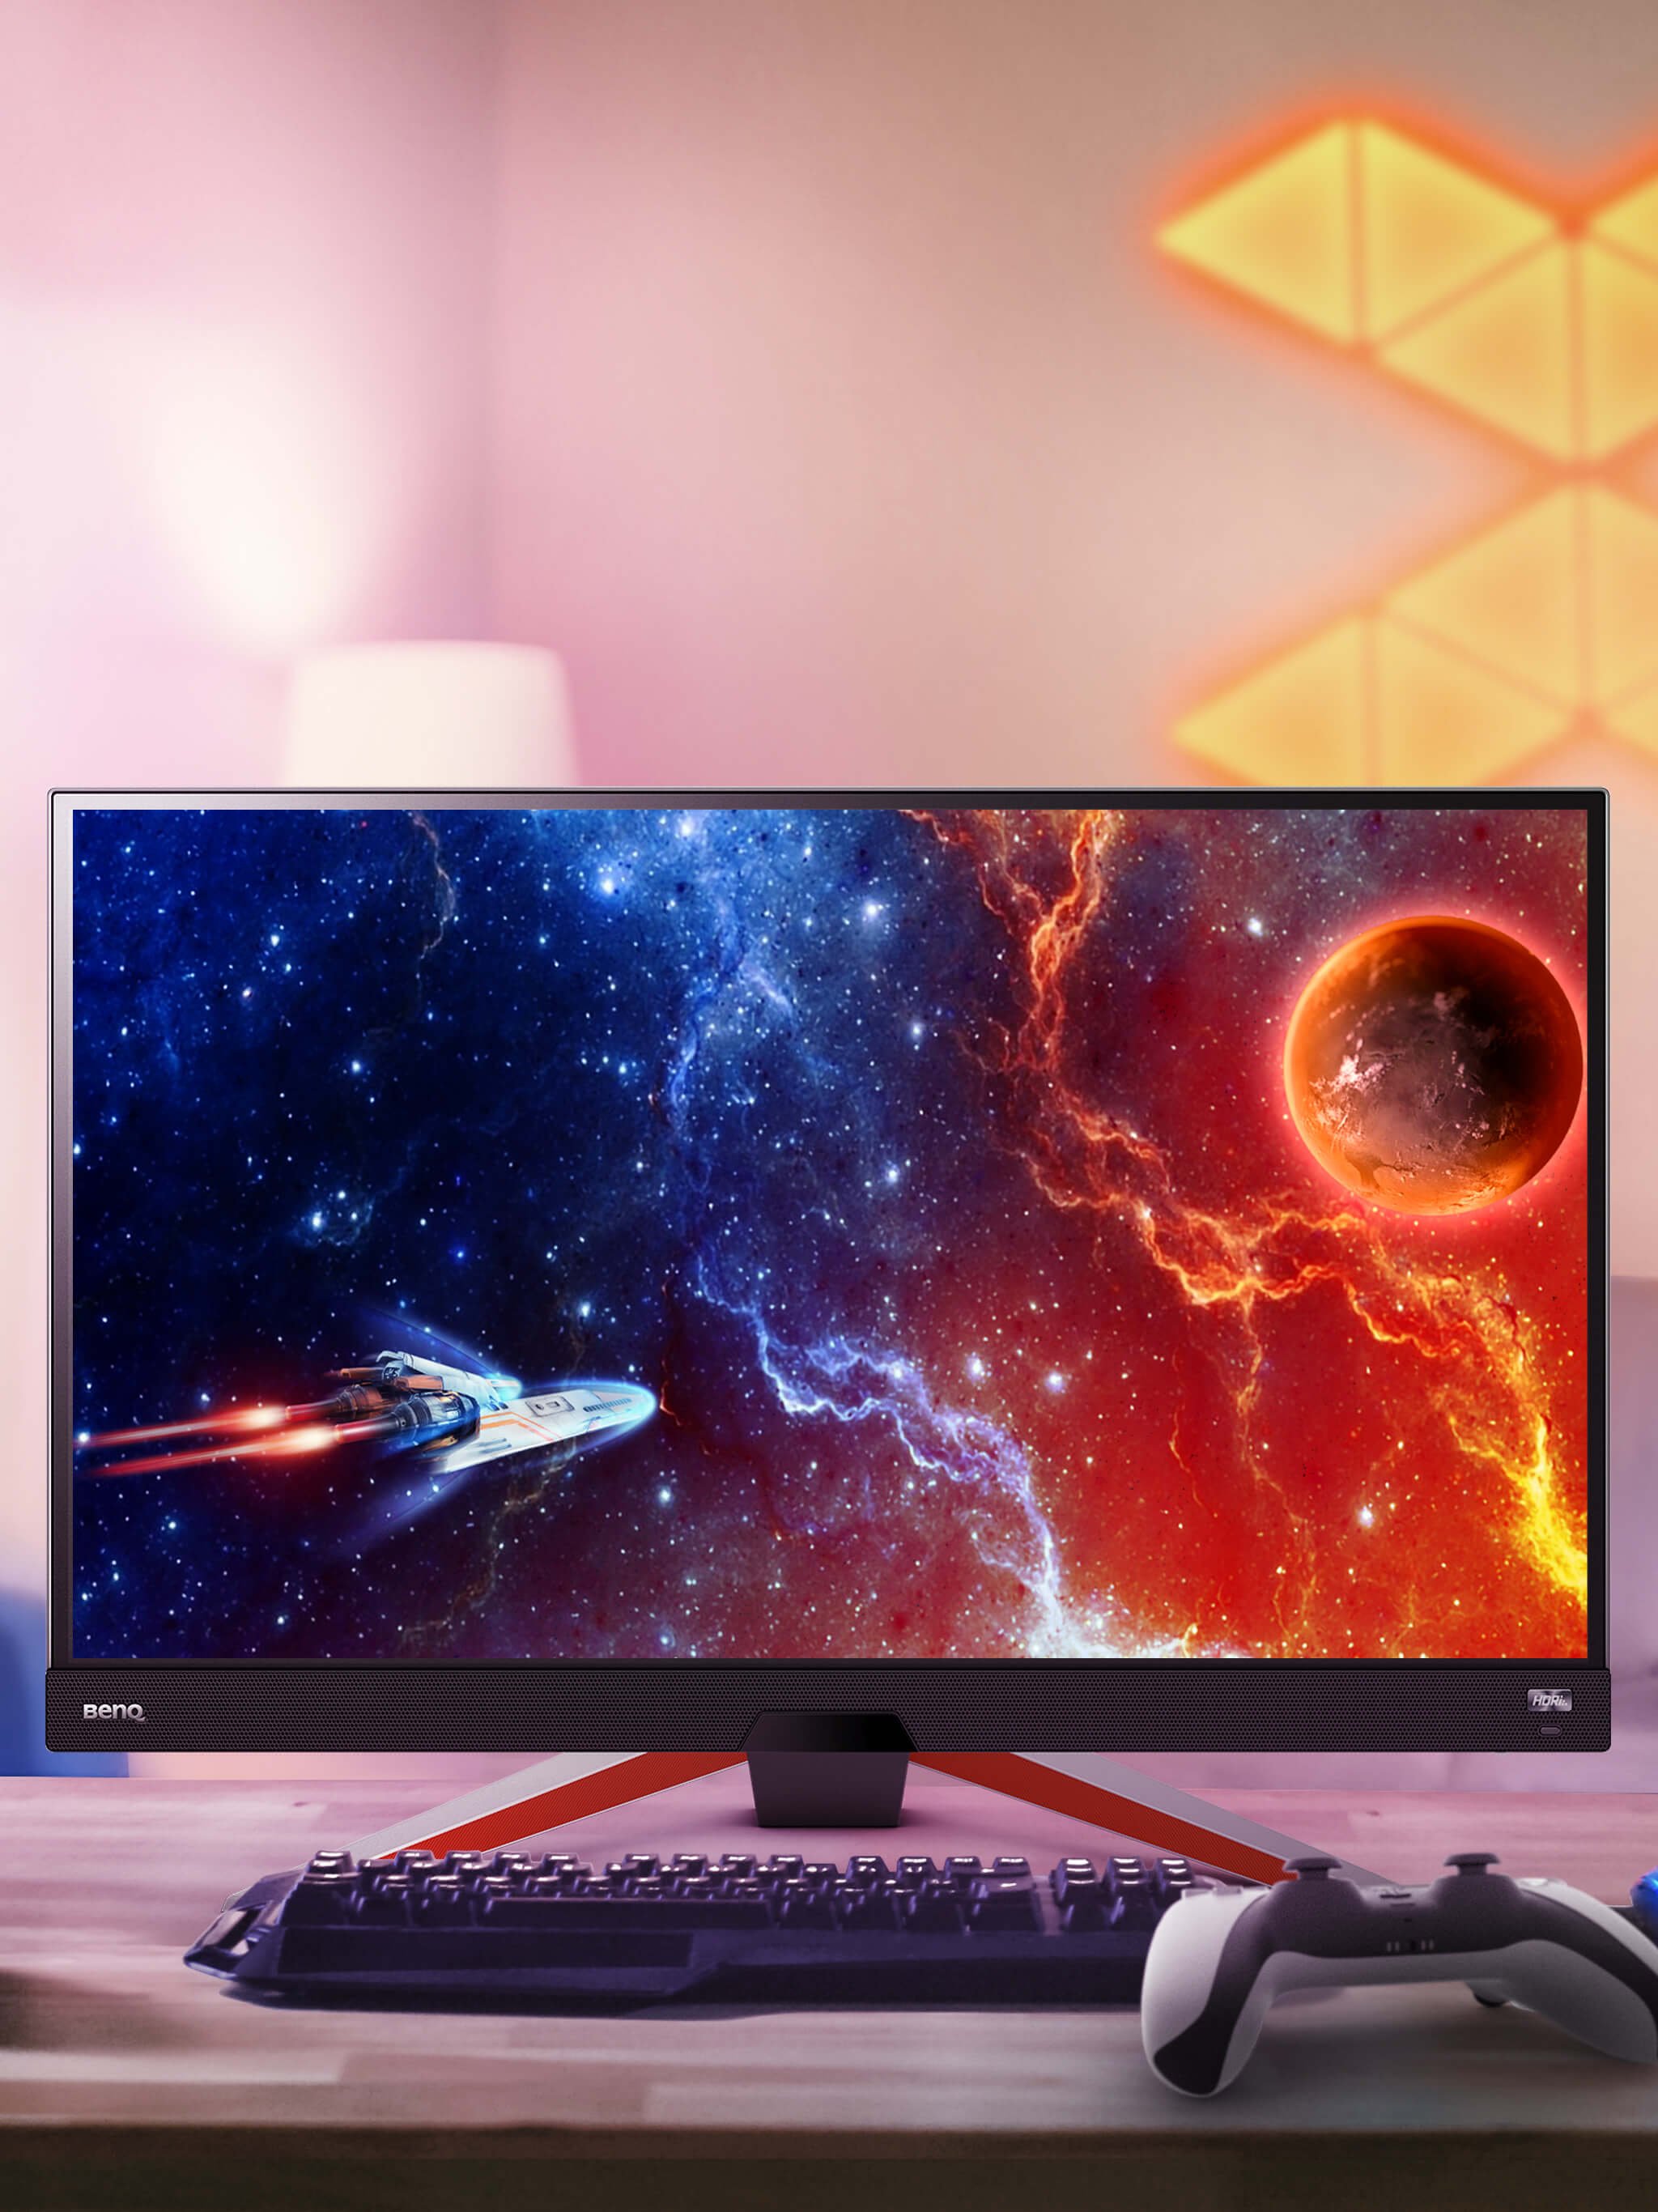 Reviews of ex2510s monitor